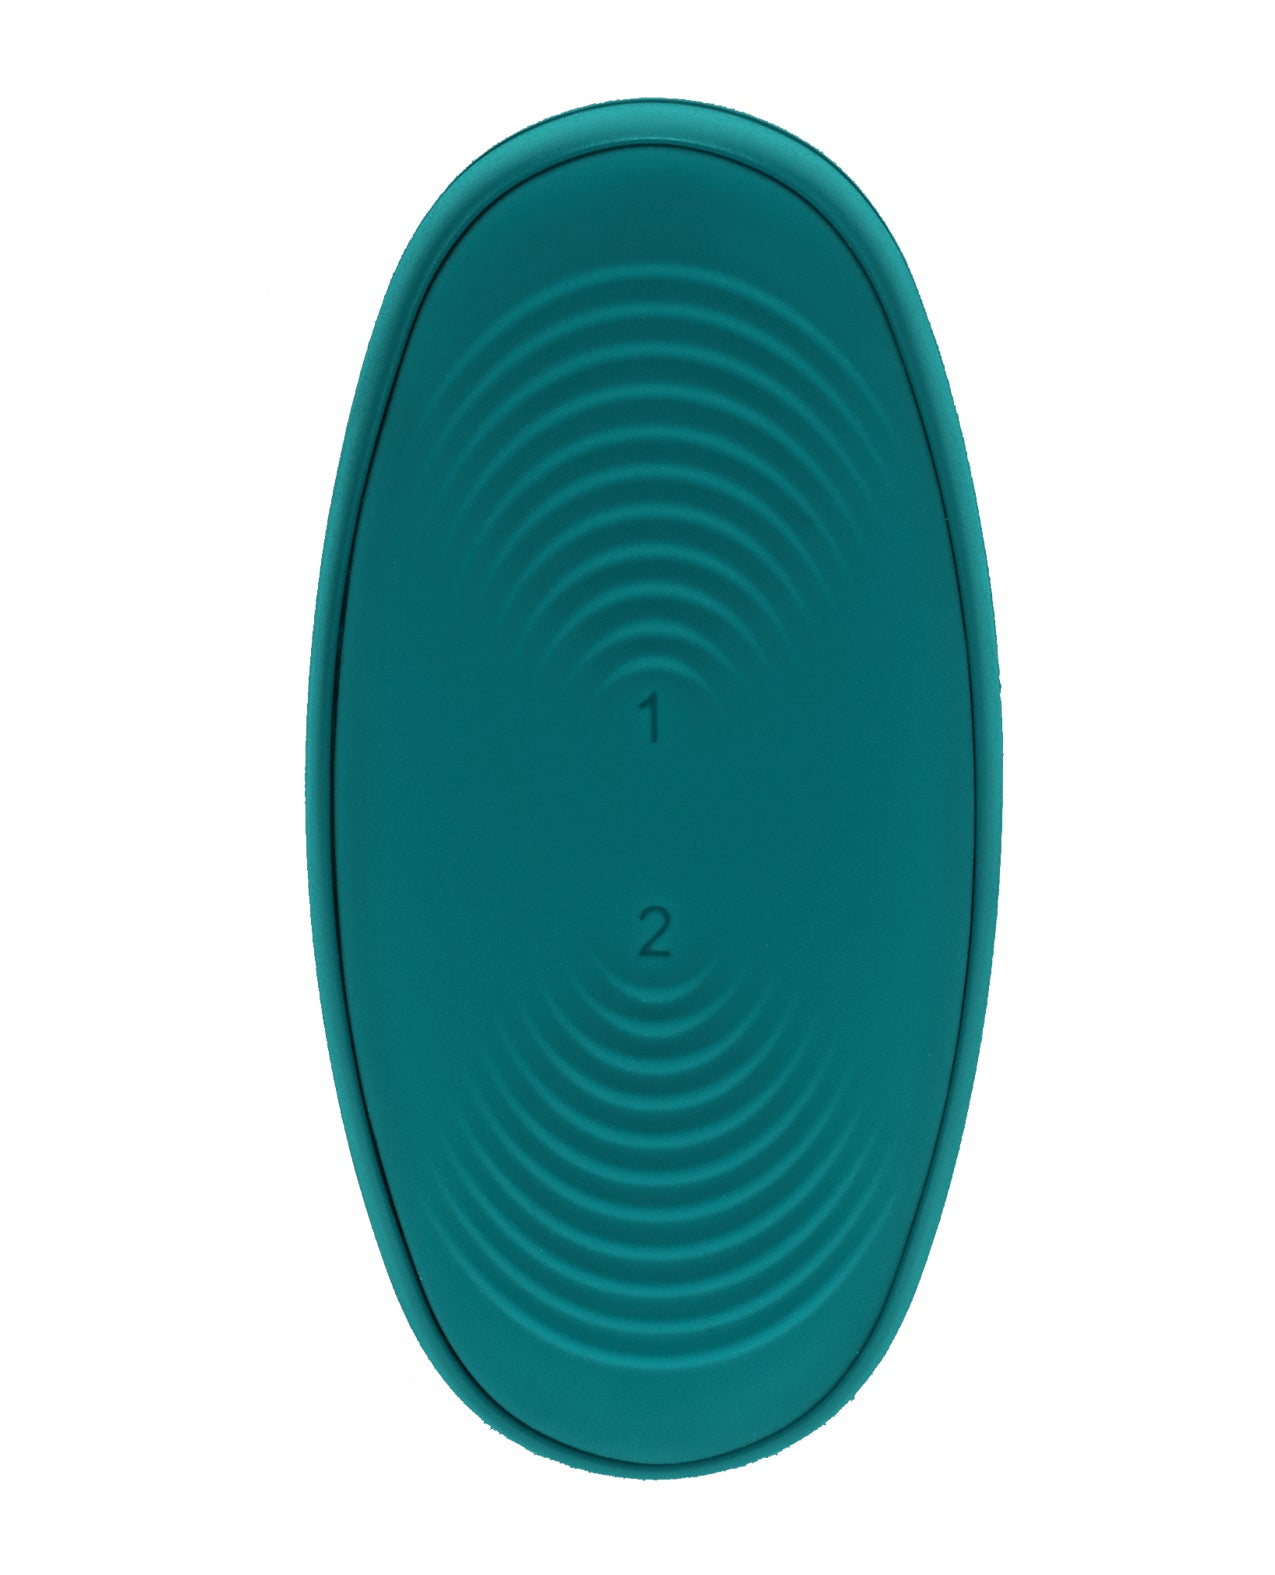 Tryst V2 Bendable Multi Zone Massager w/Remote - Teal - Essence Of Nature LLC